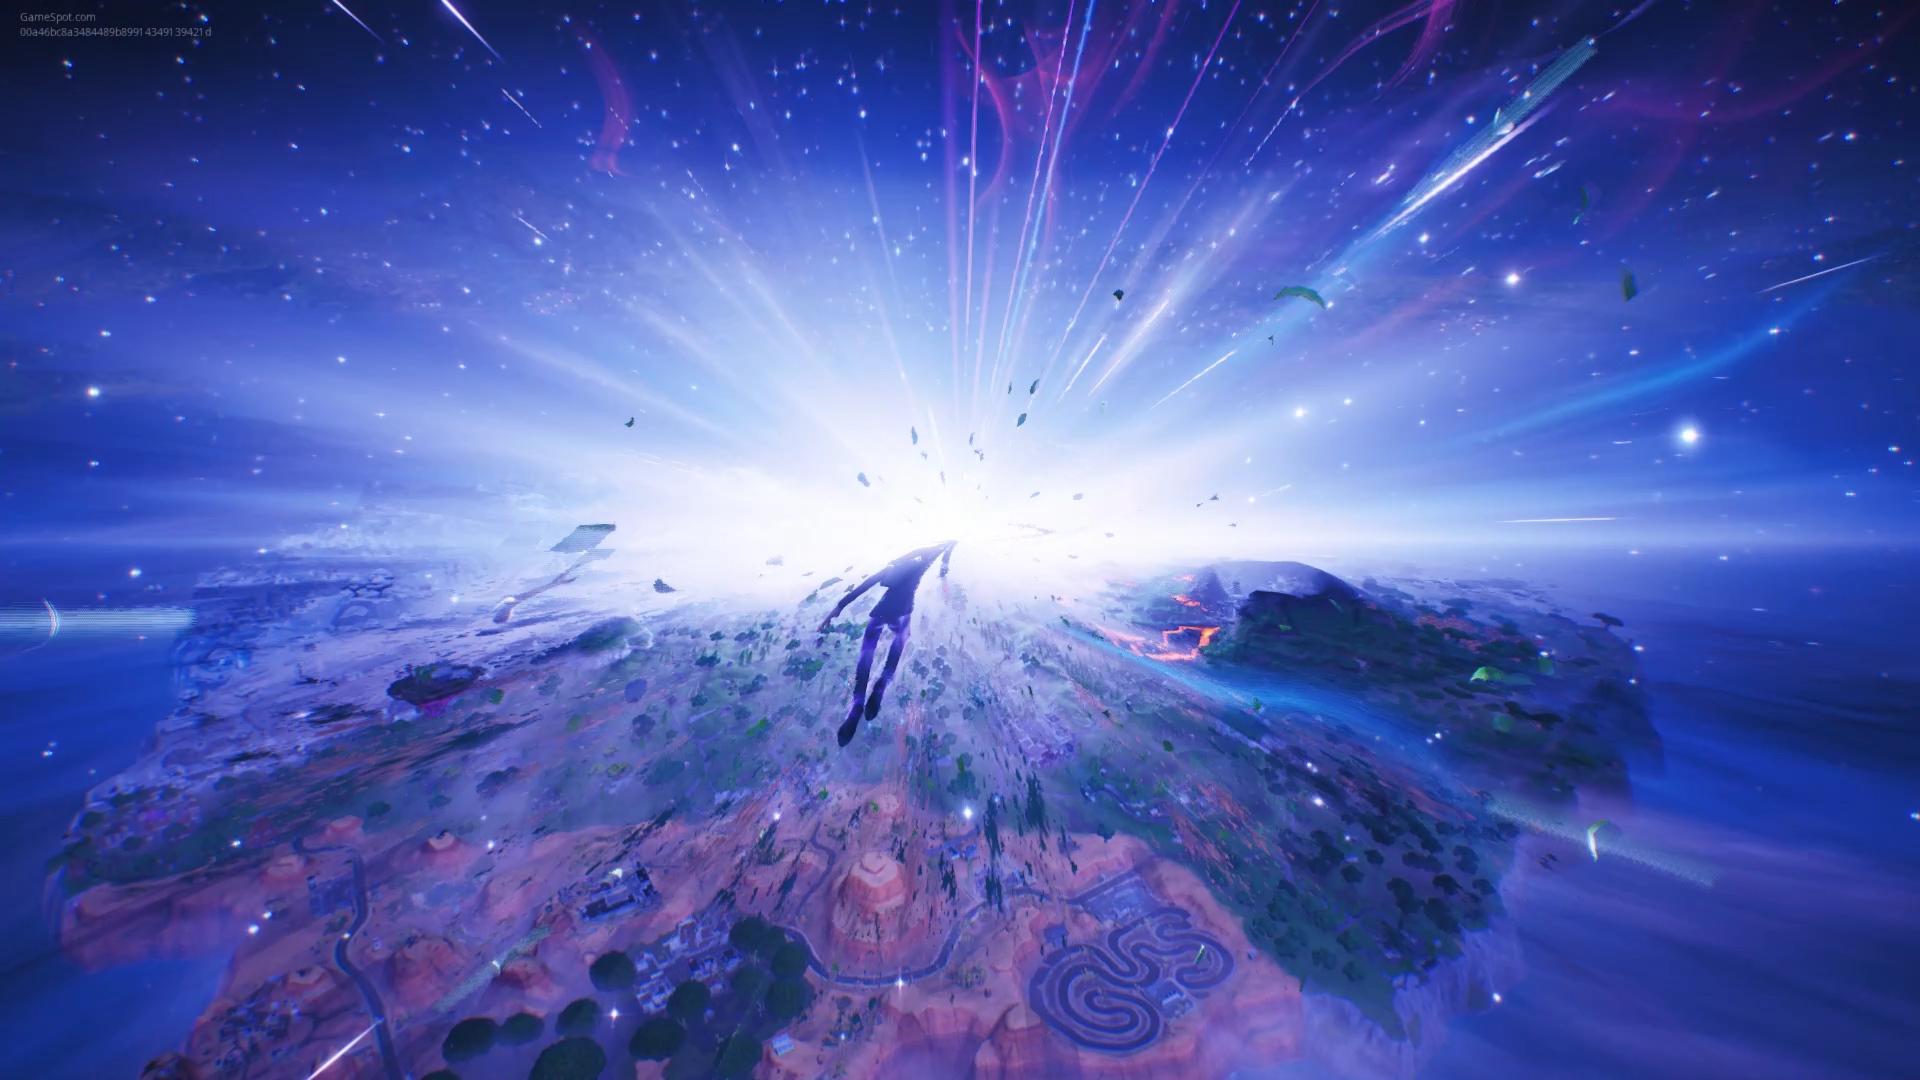 Fortnite Season 11: A Black Hole Destroyed Everything In